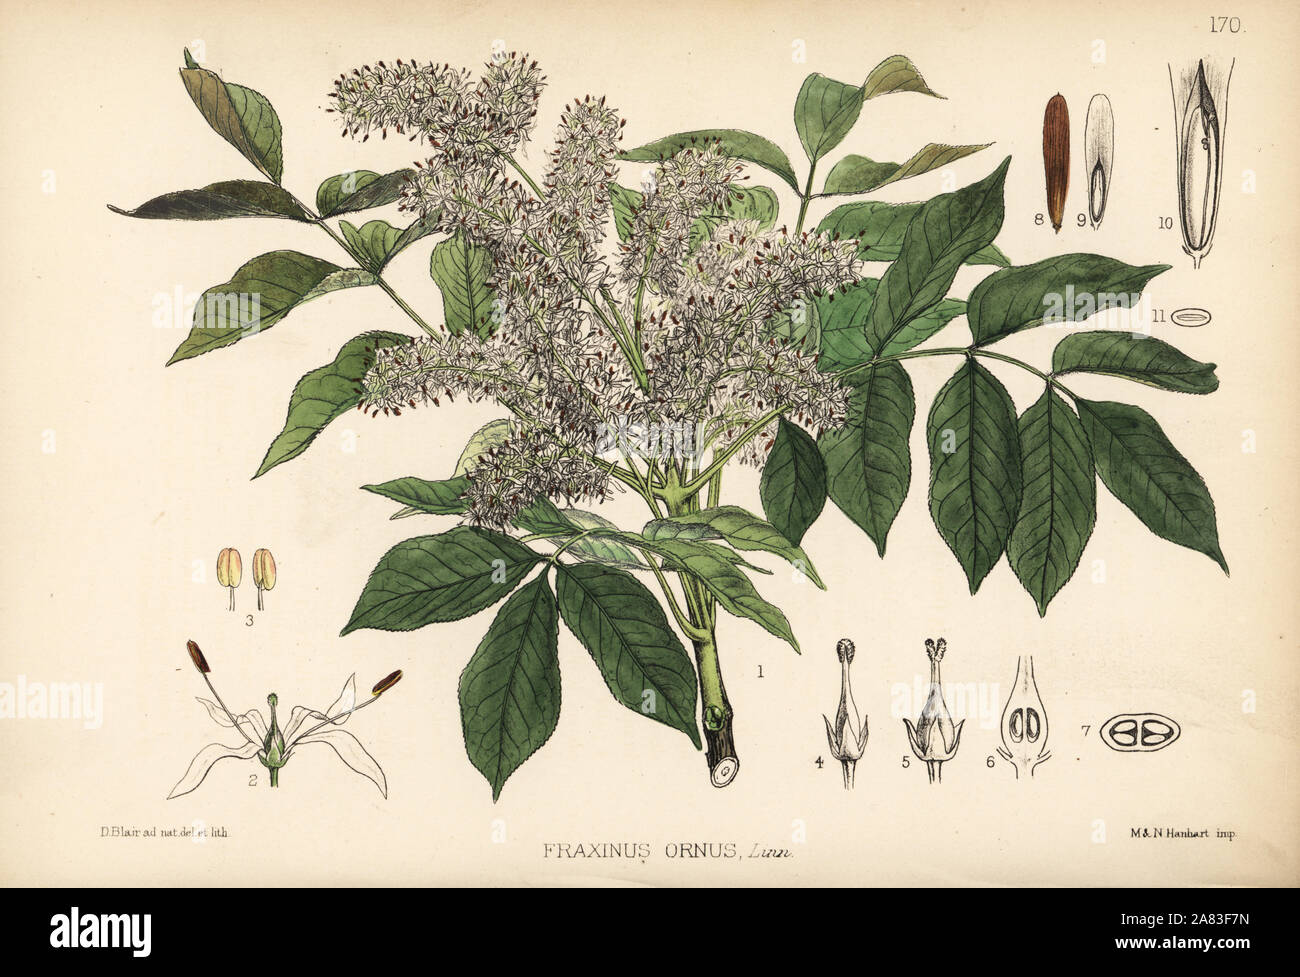 Manna ash or flowering ash, Fraxinus ornus. Handcoloured lithograph by Hanhart after a botanical illustration by David Blair from Robert Bentley and Henry Trimen's Medicinal Plants, London, 1880. Stock Photo